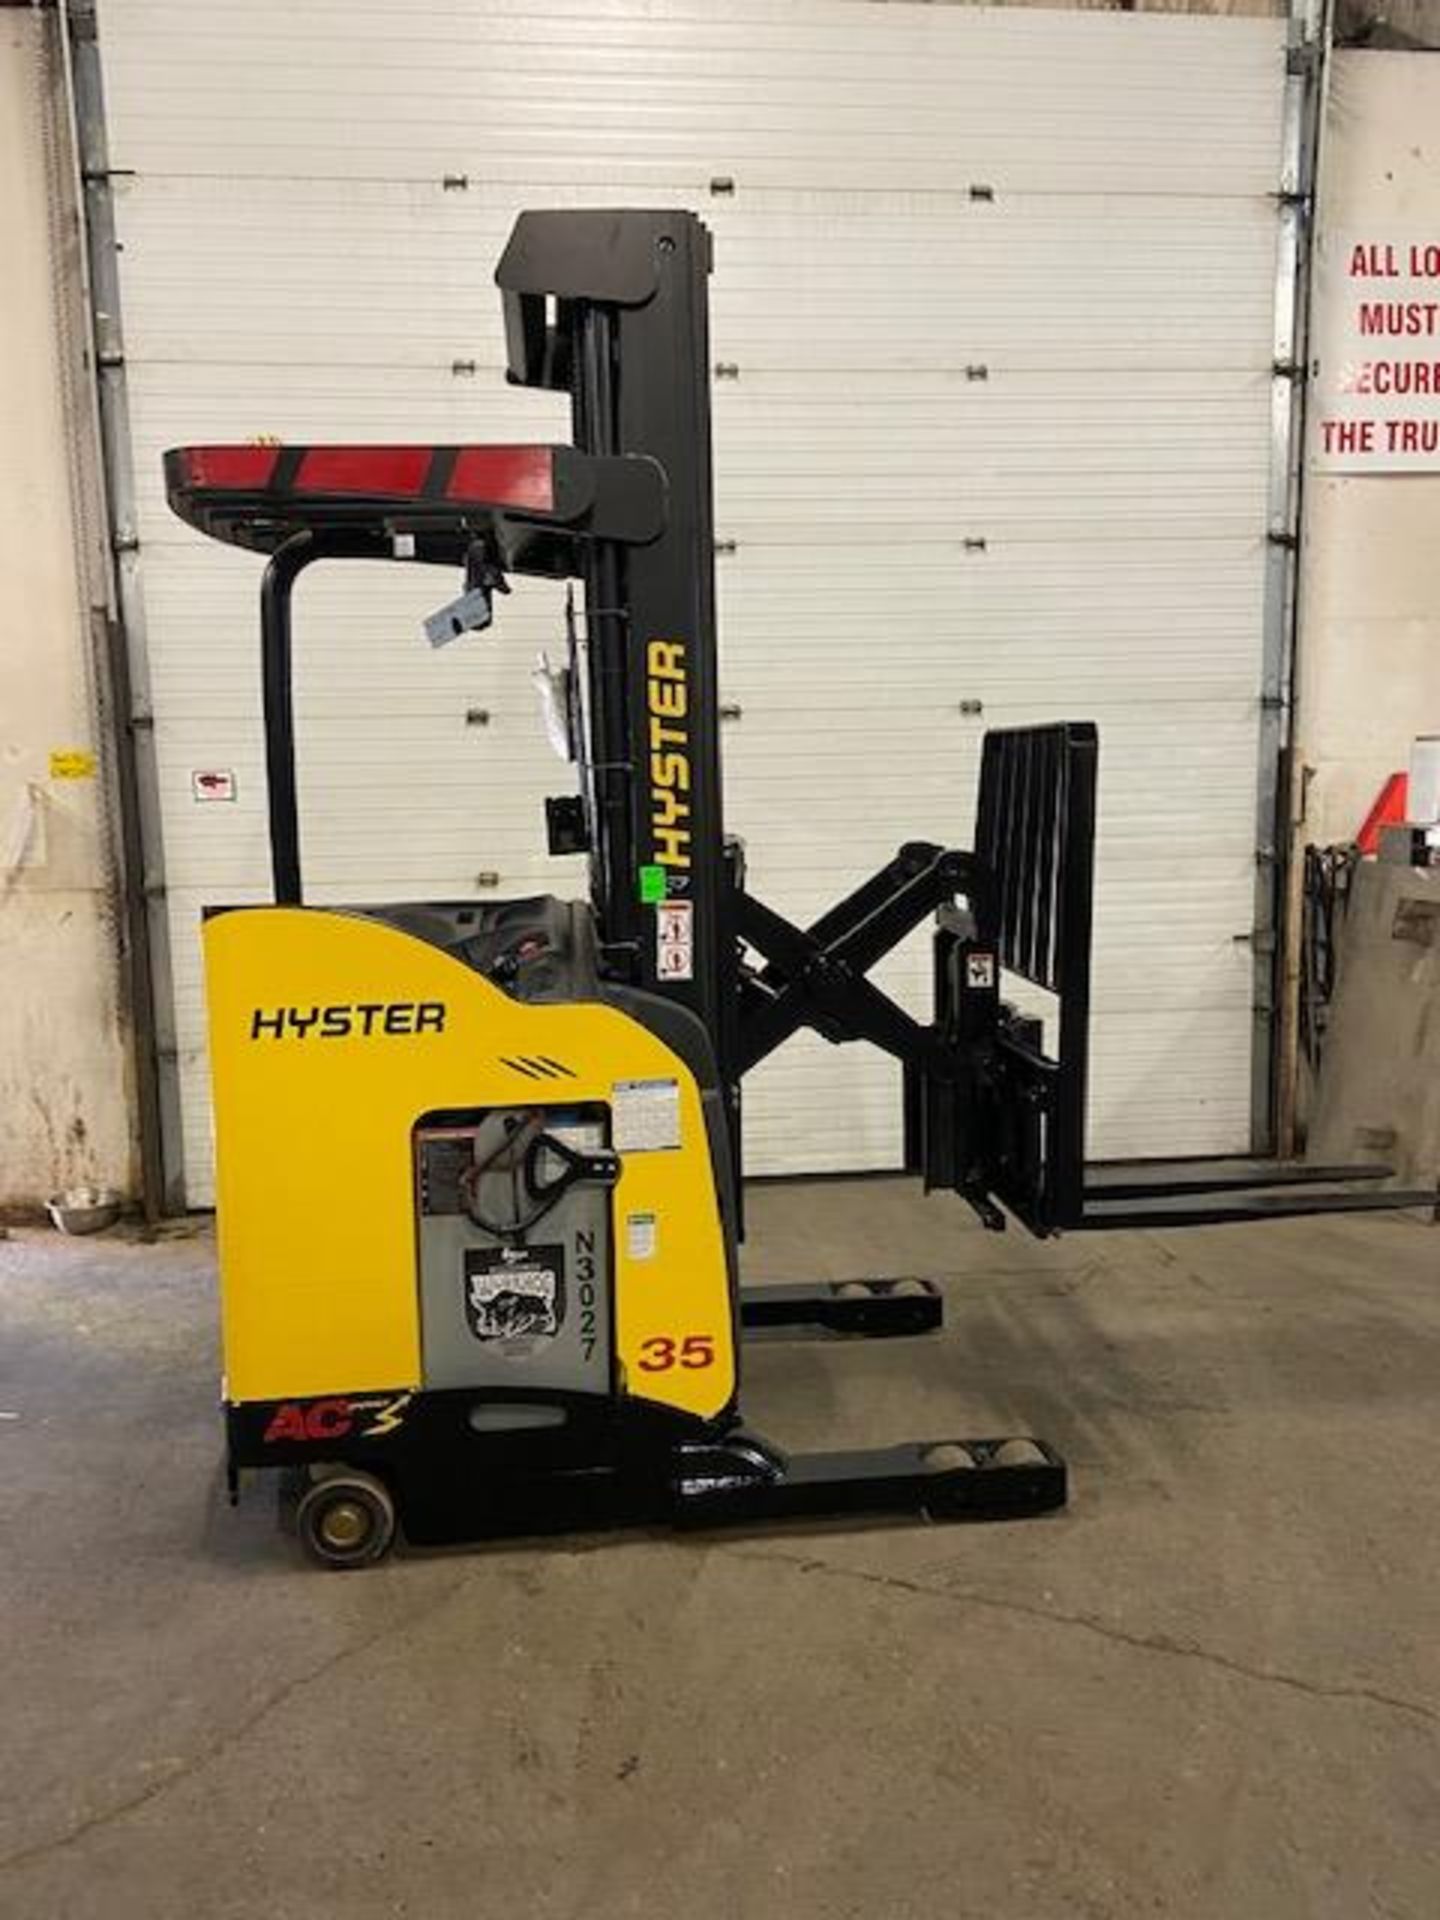 FREE CUSTOMS - 2013 Hyster Reach Truck Pallet Lifter REACH TRUCK electric 3500lbs with sideshift 3-